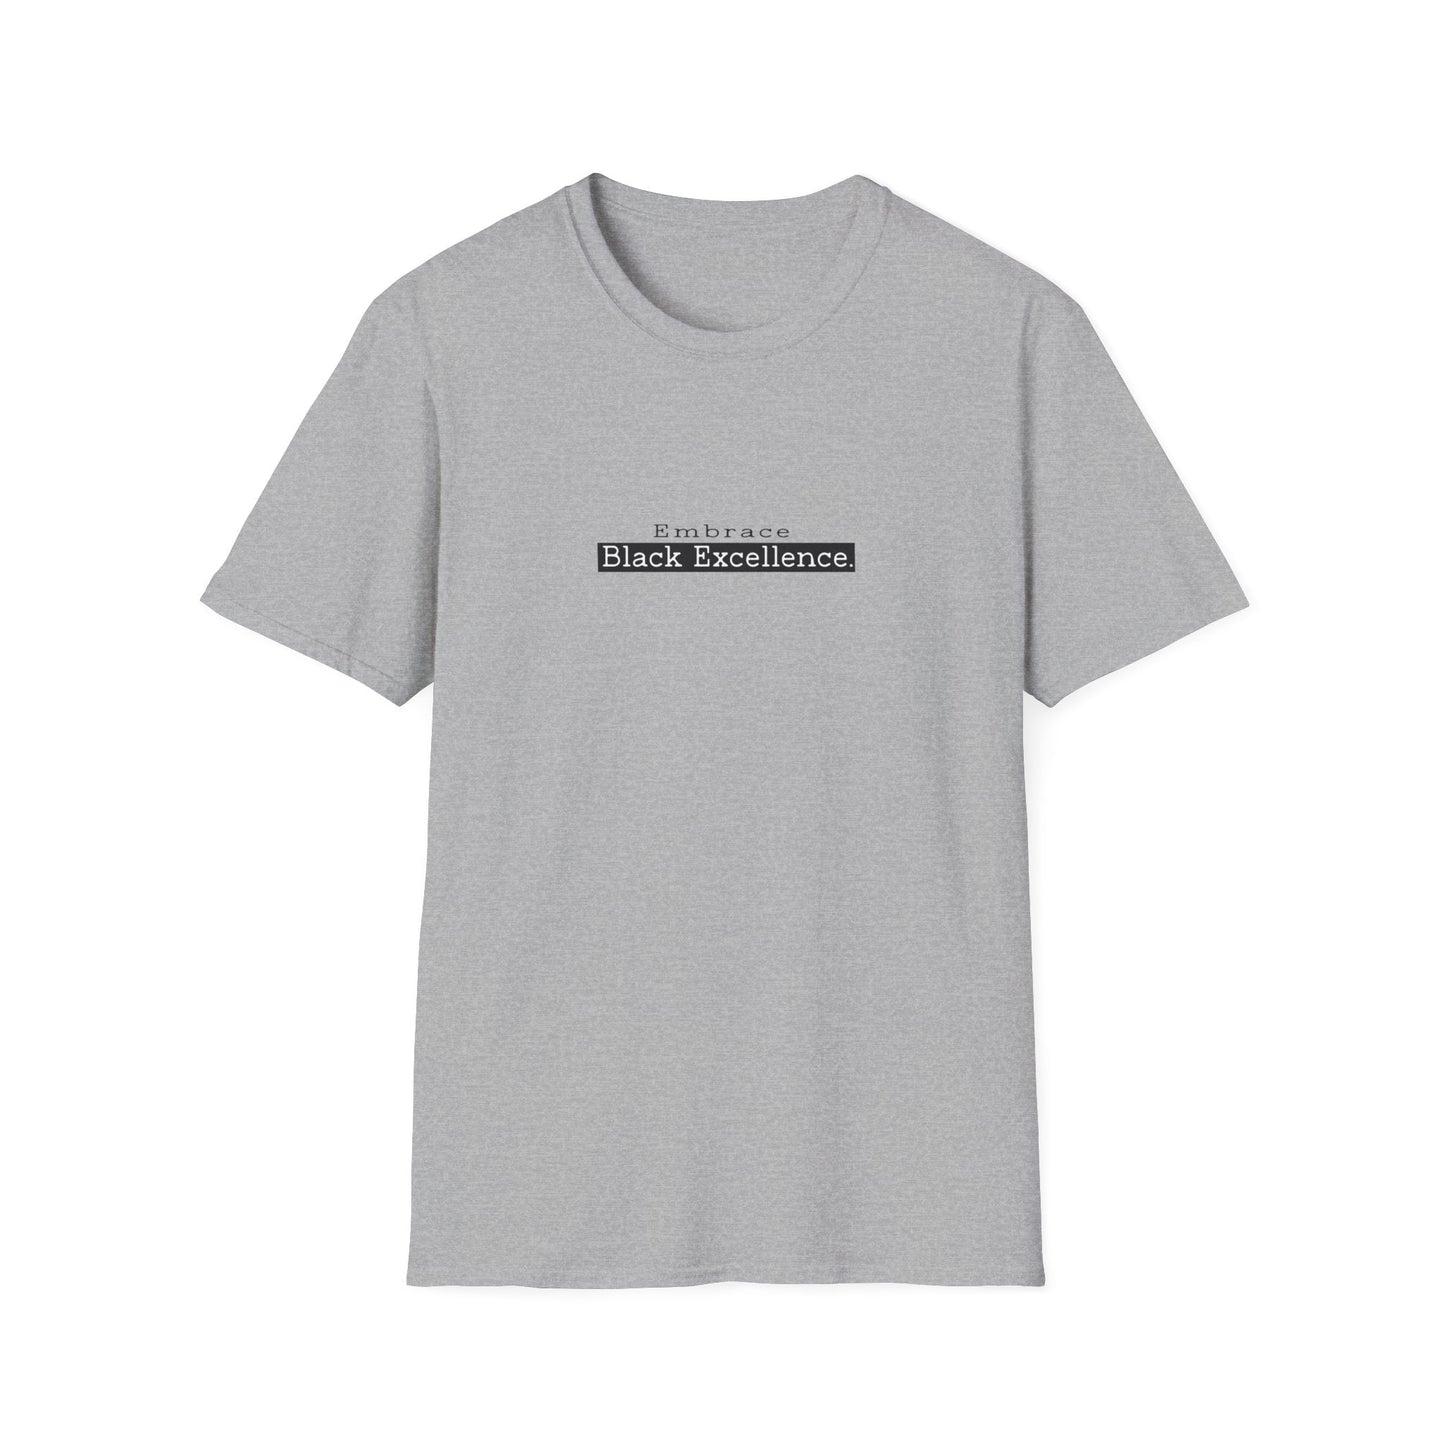 Black Excellence T Shirt Simple